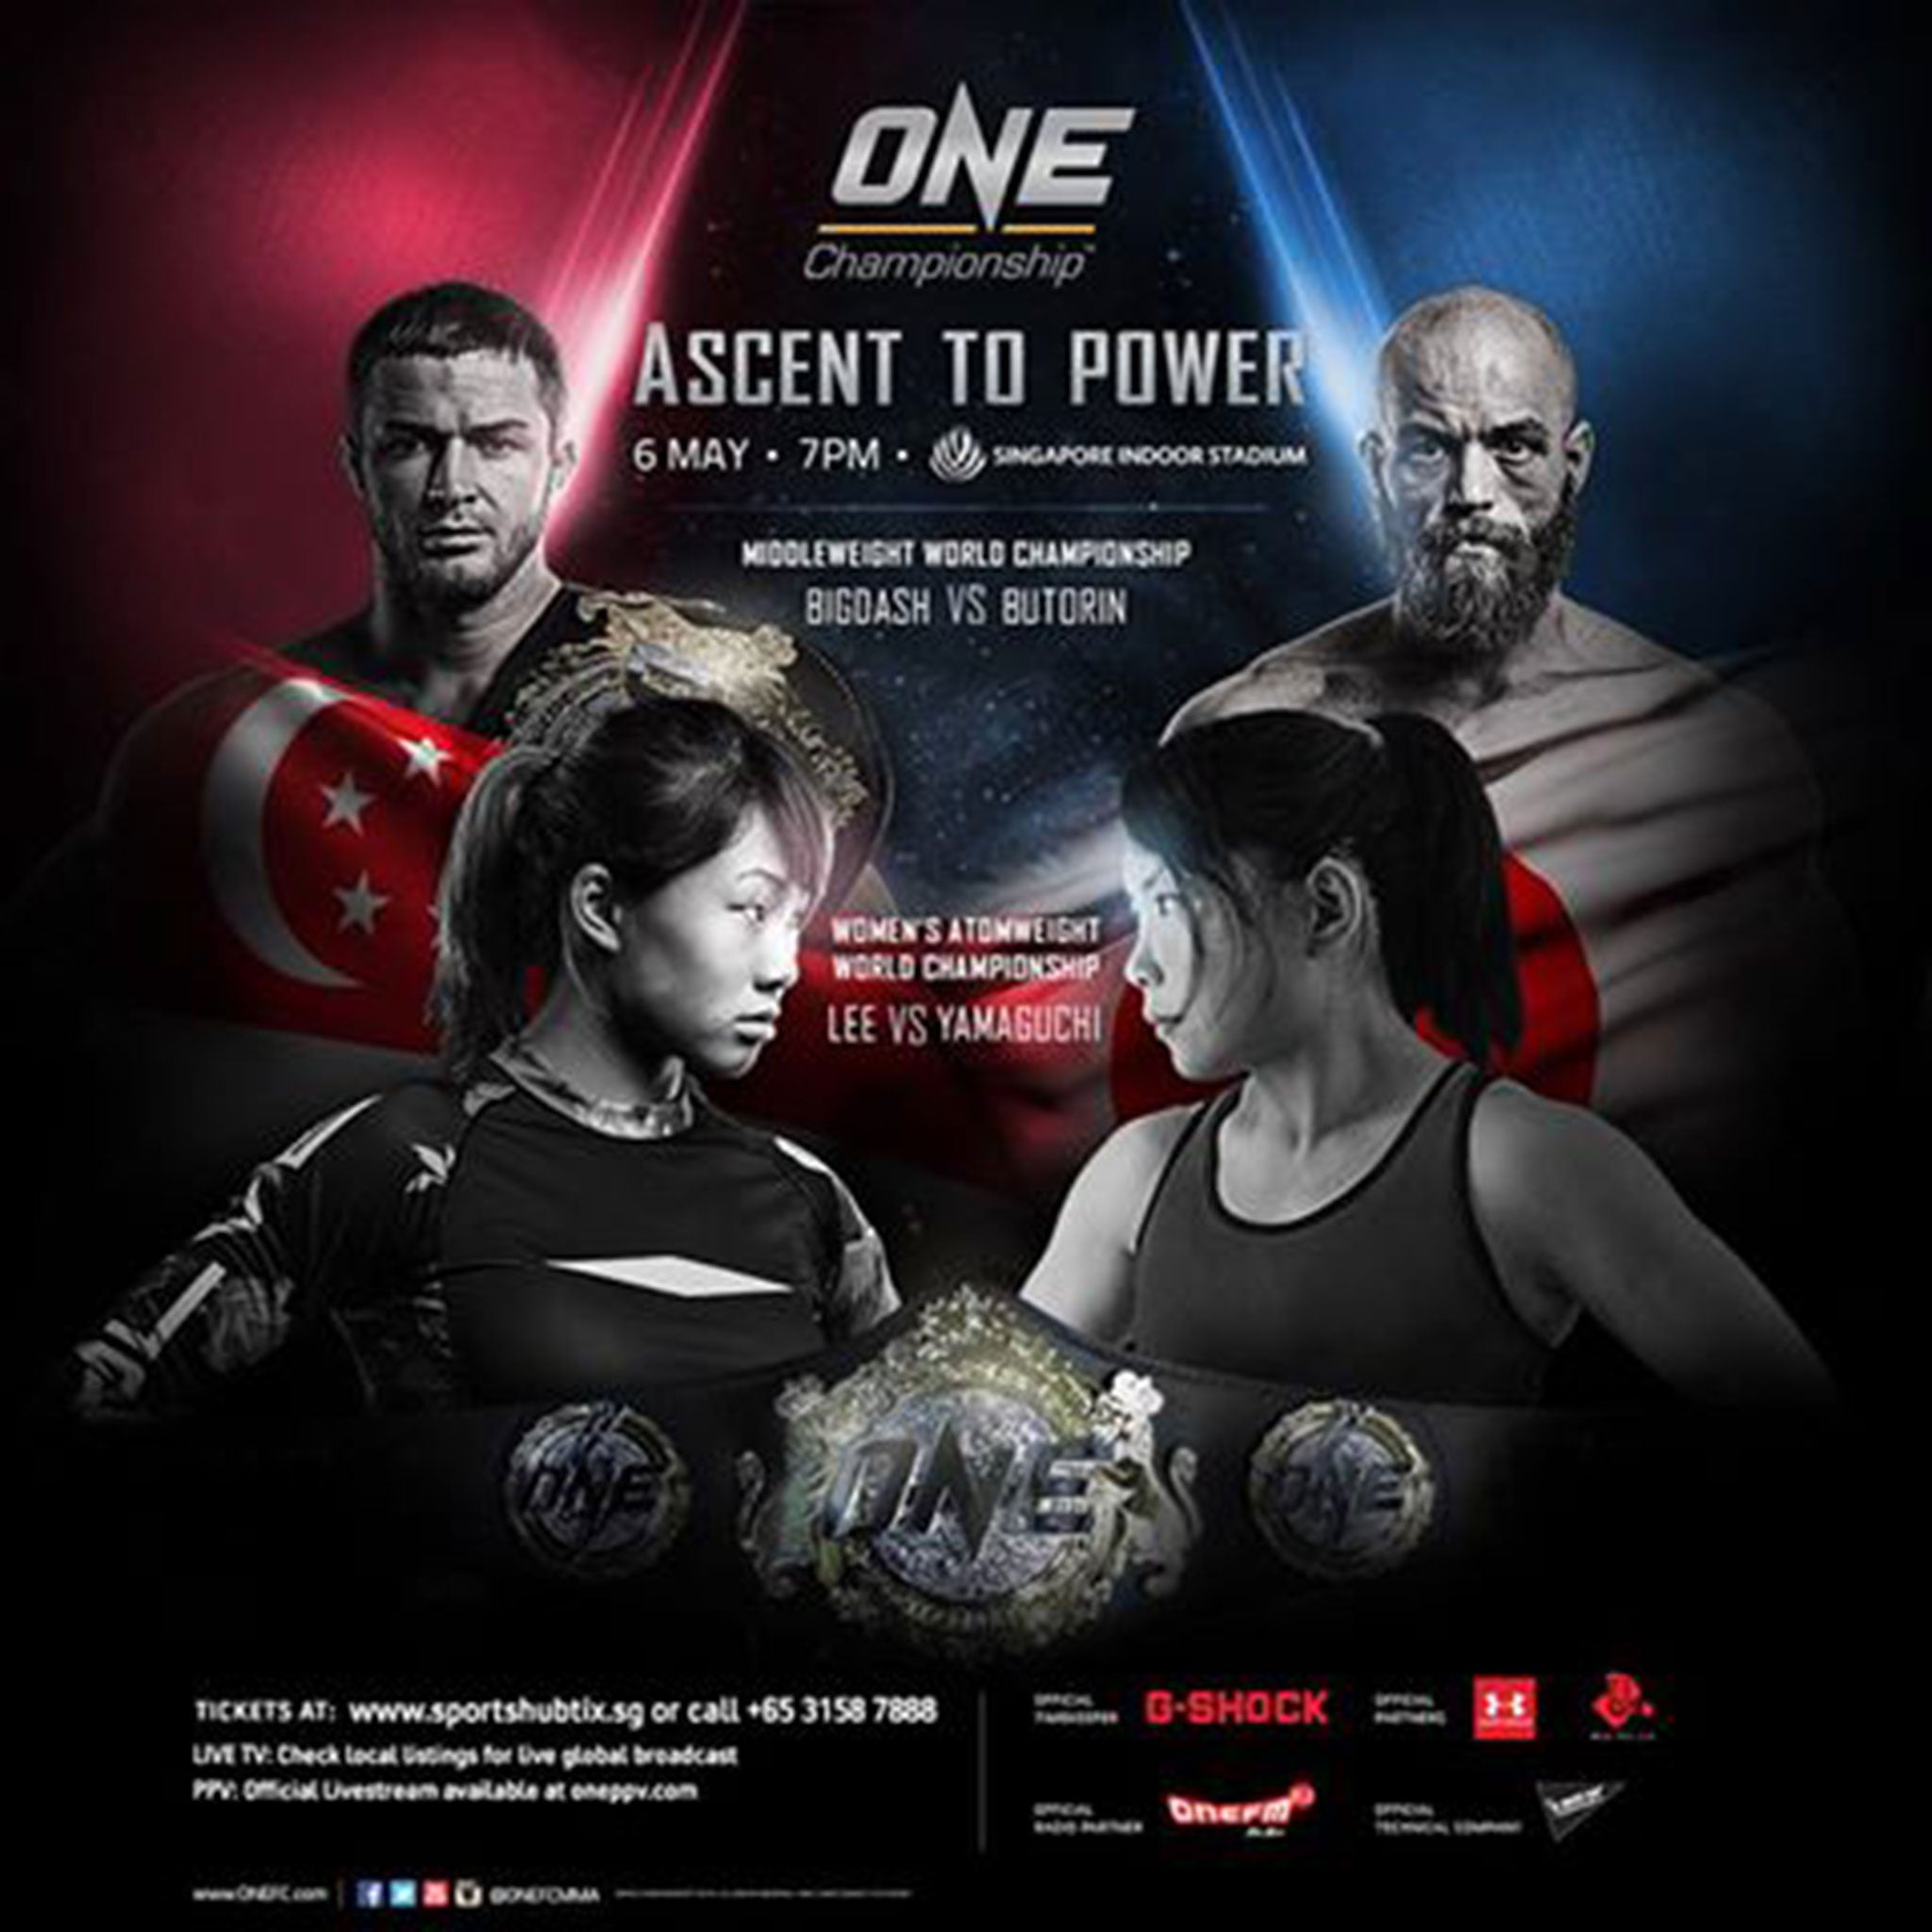 Angela Lee looking to make history and pioneer womens MMA at ONE Ascent To Power The Independent The Independent